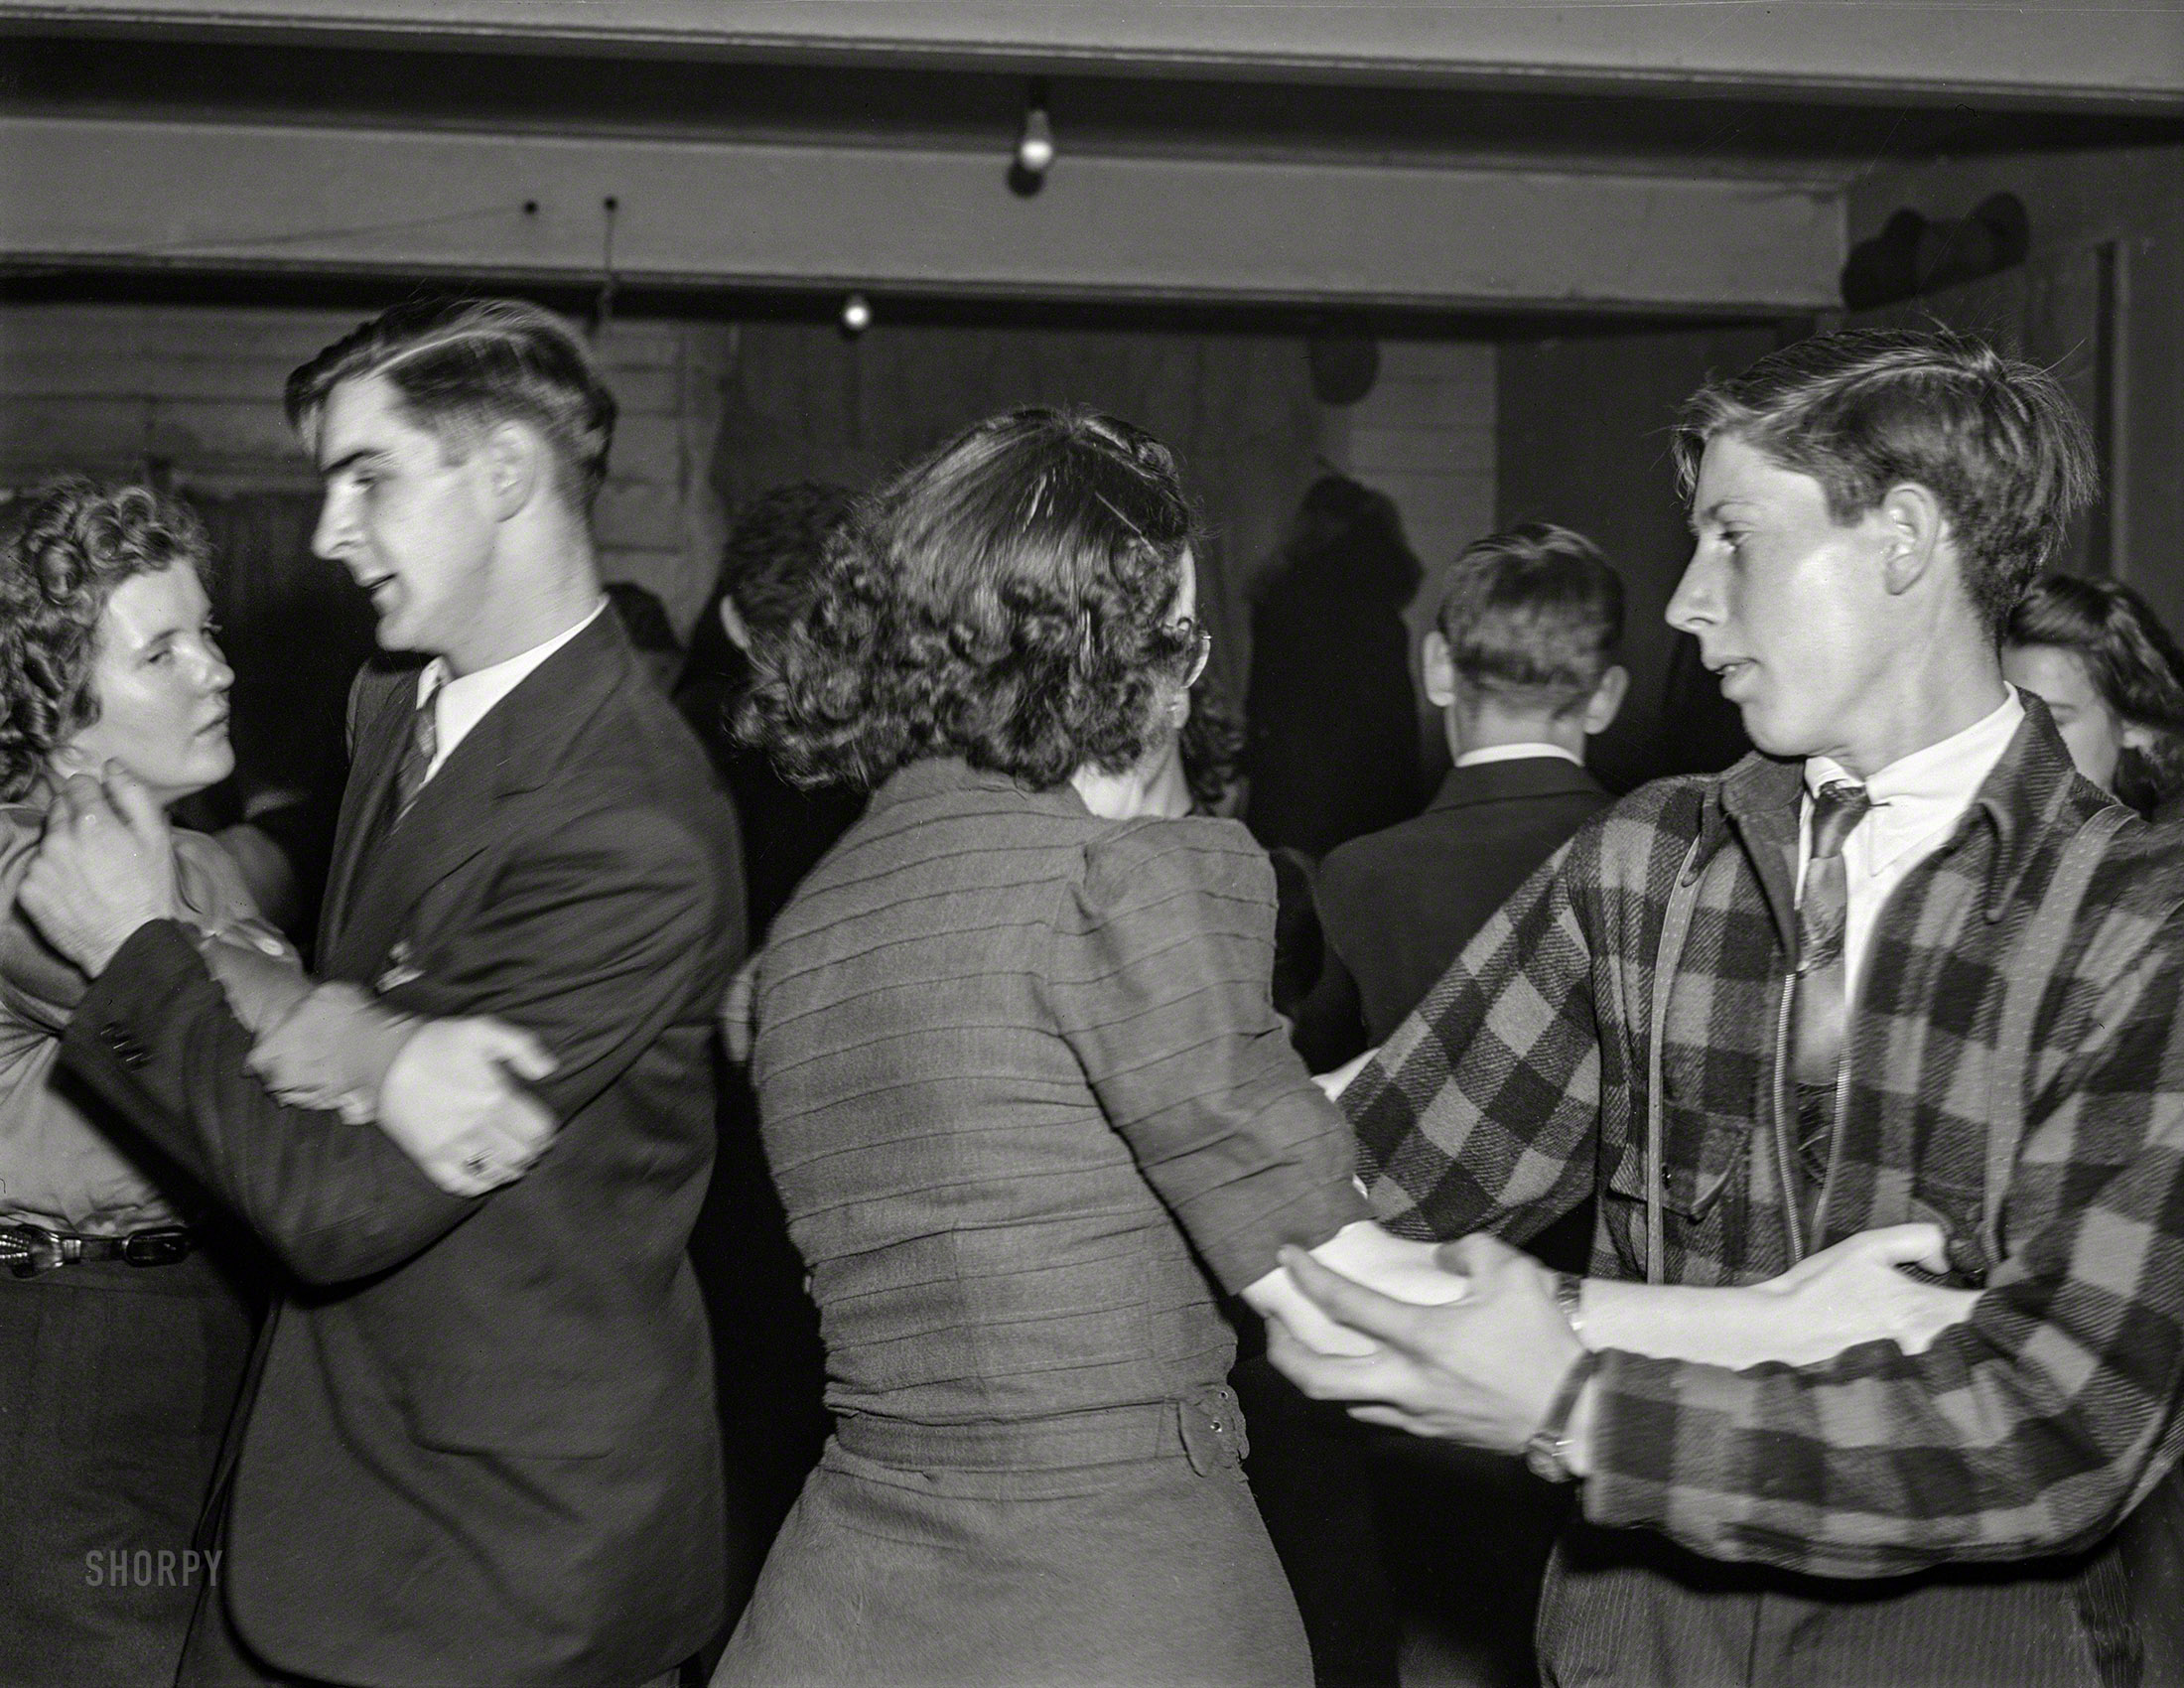 December 1940. "At a Saturday night square dance in Clayville, Rhode Island." Medium format acetate negative by Jack Delano. View full size.